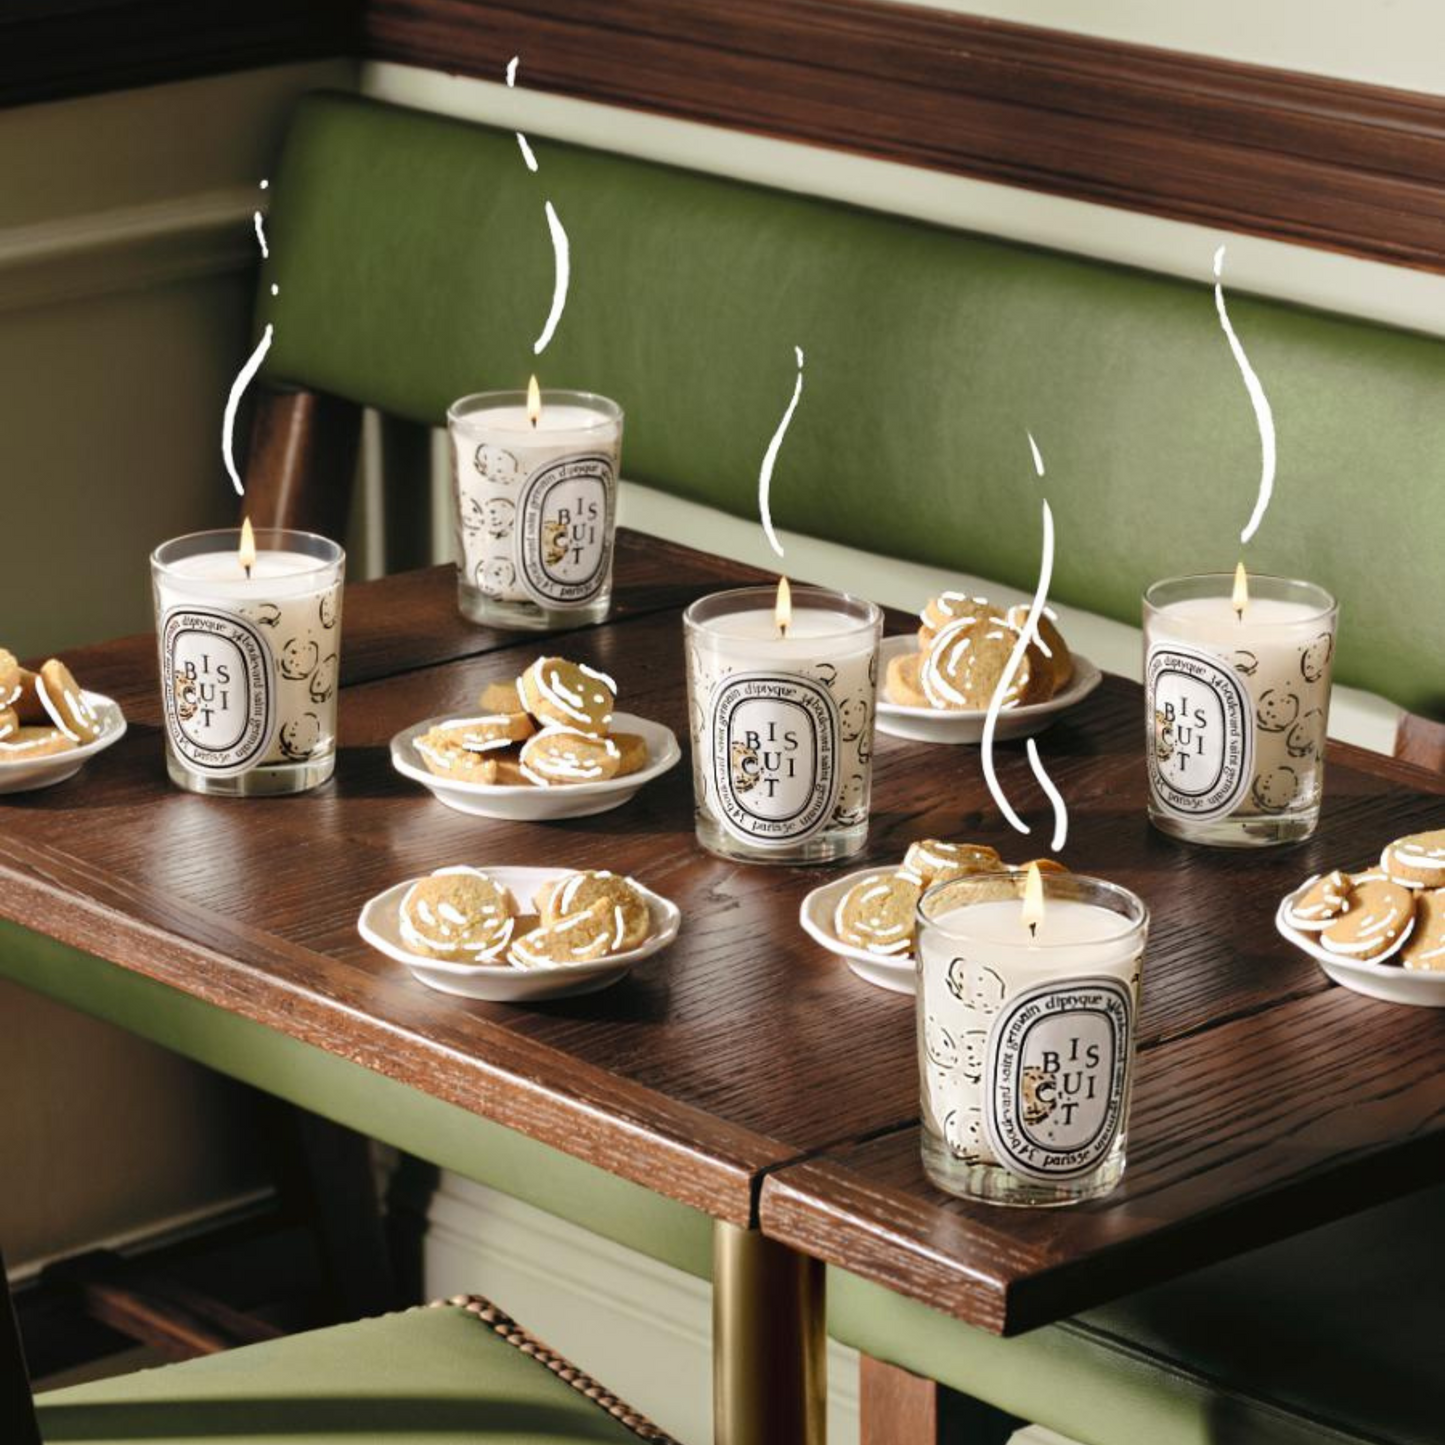 Diptyque - Classic Candle - Biscuit (Cookie)